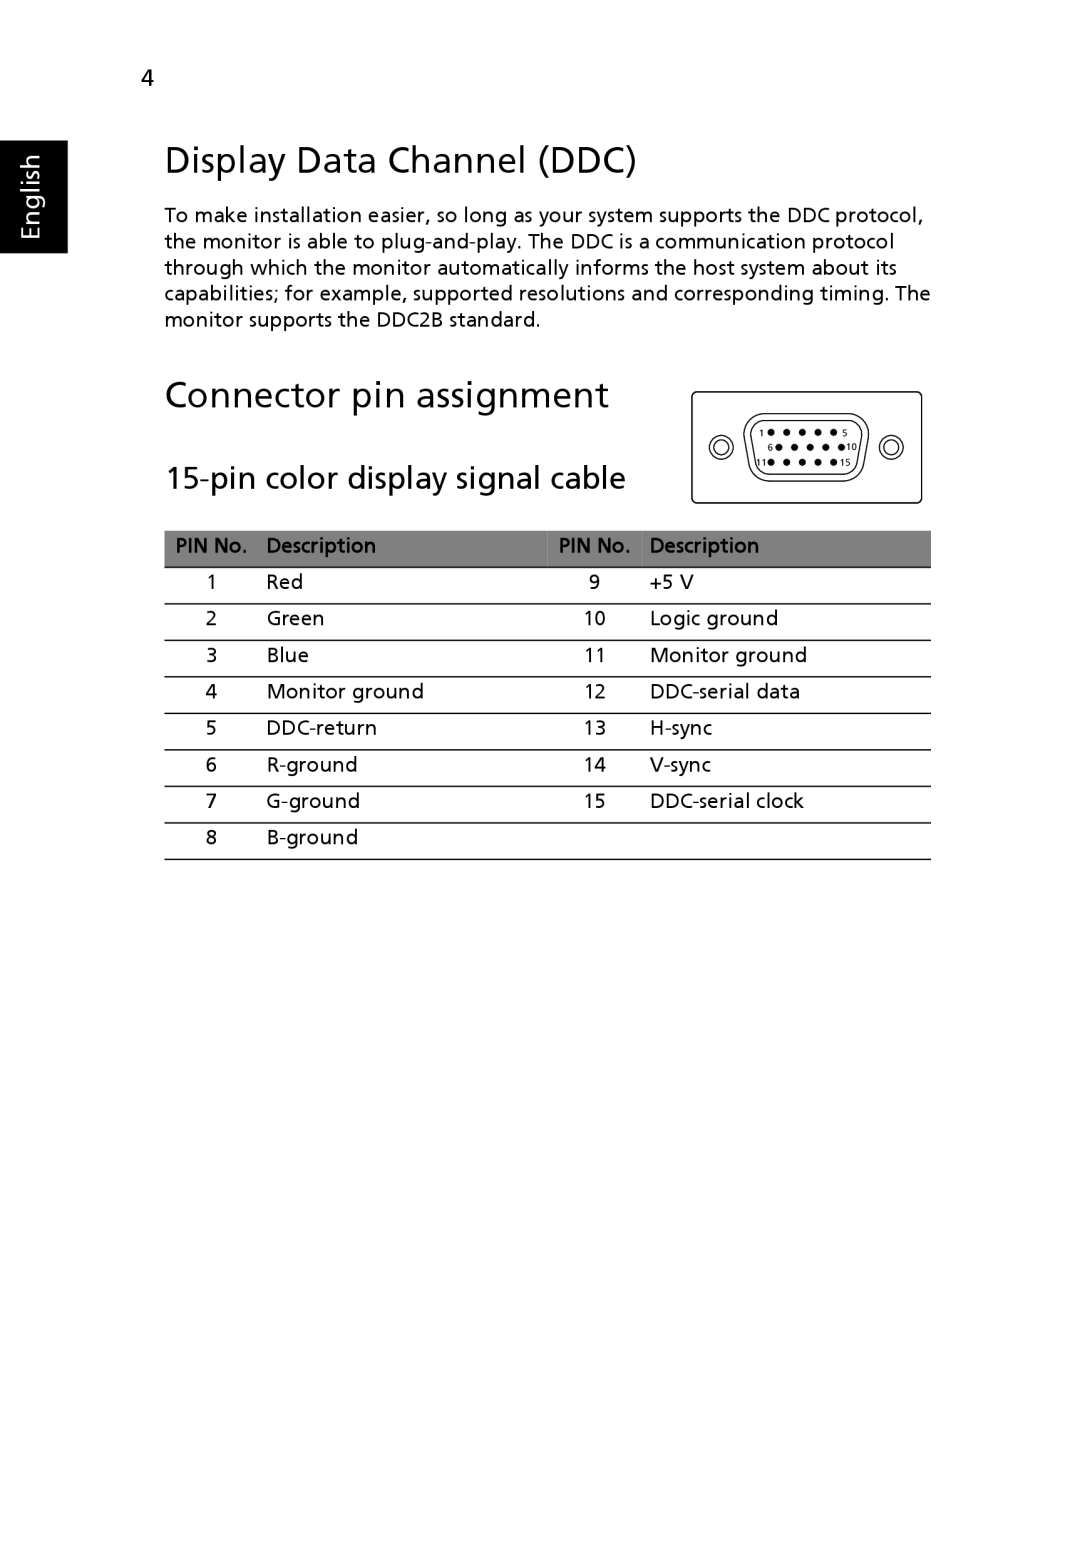 Acer S243HL manual Display Data Channel DDC, Connector pin assignment, pin color display signal cable, English 